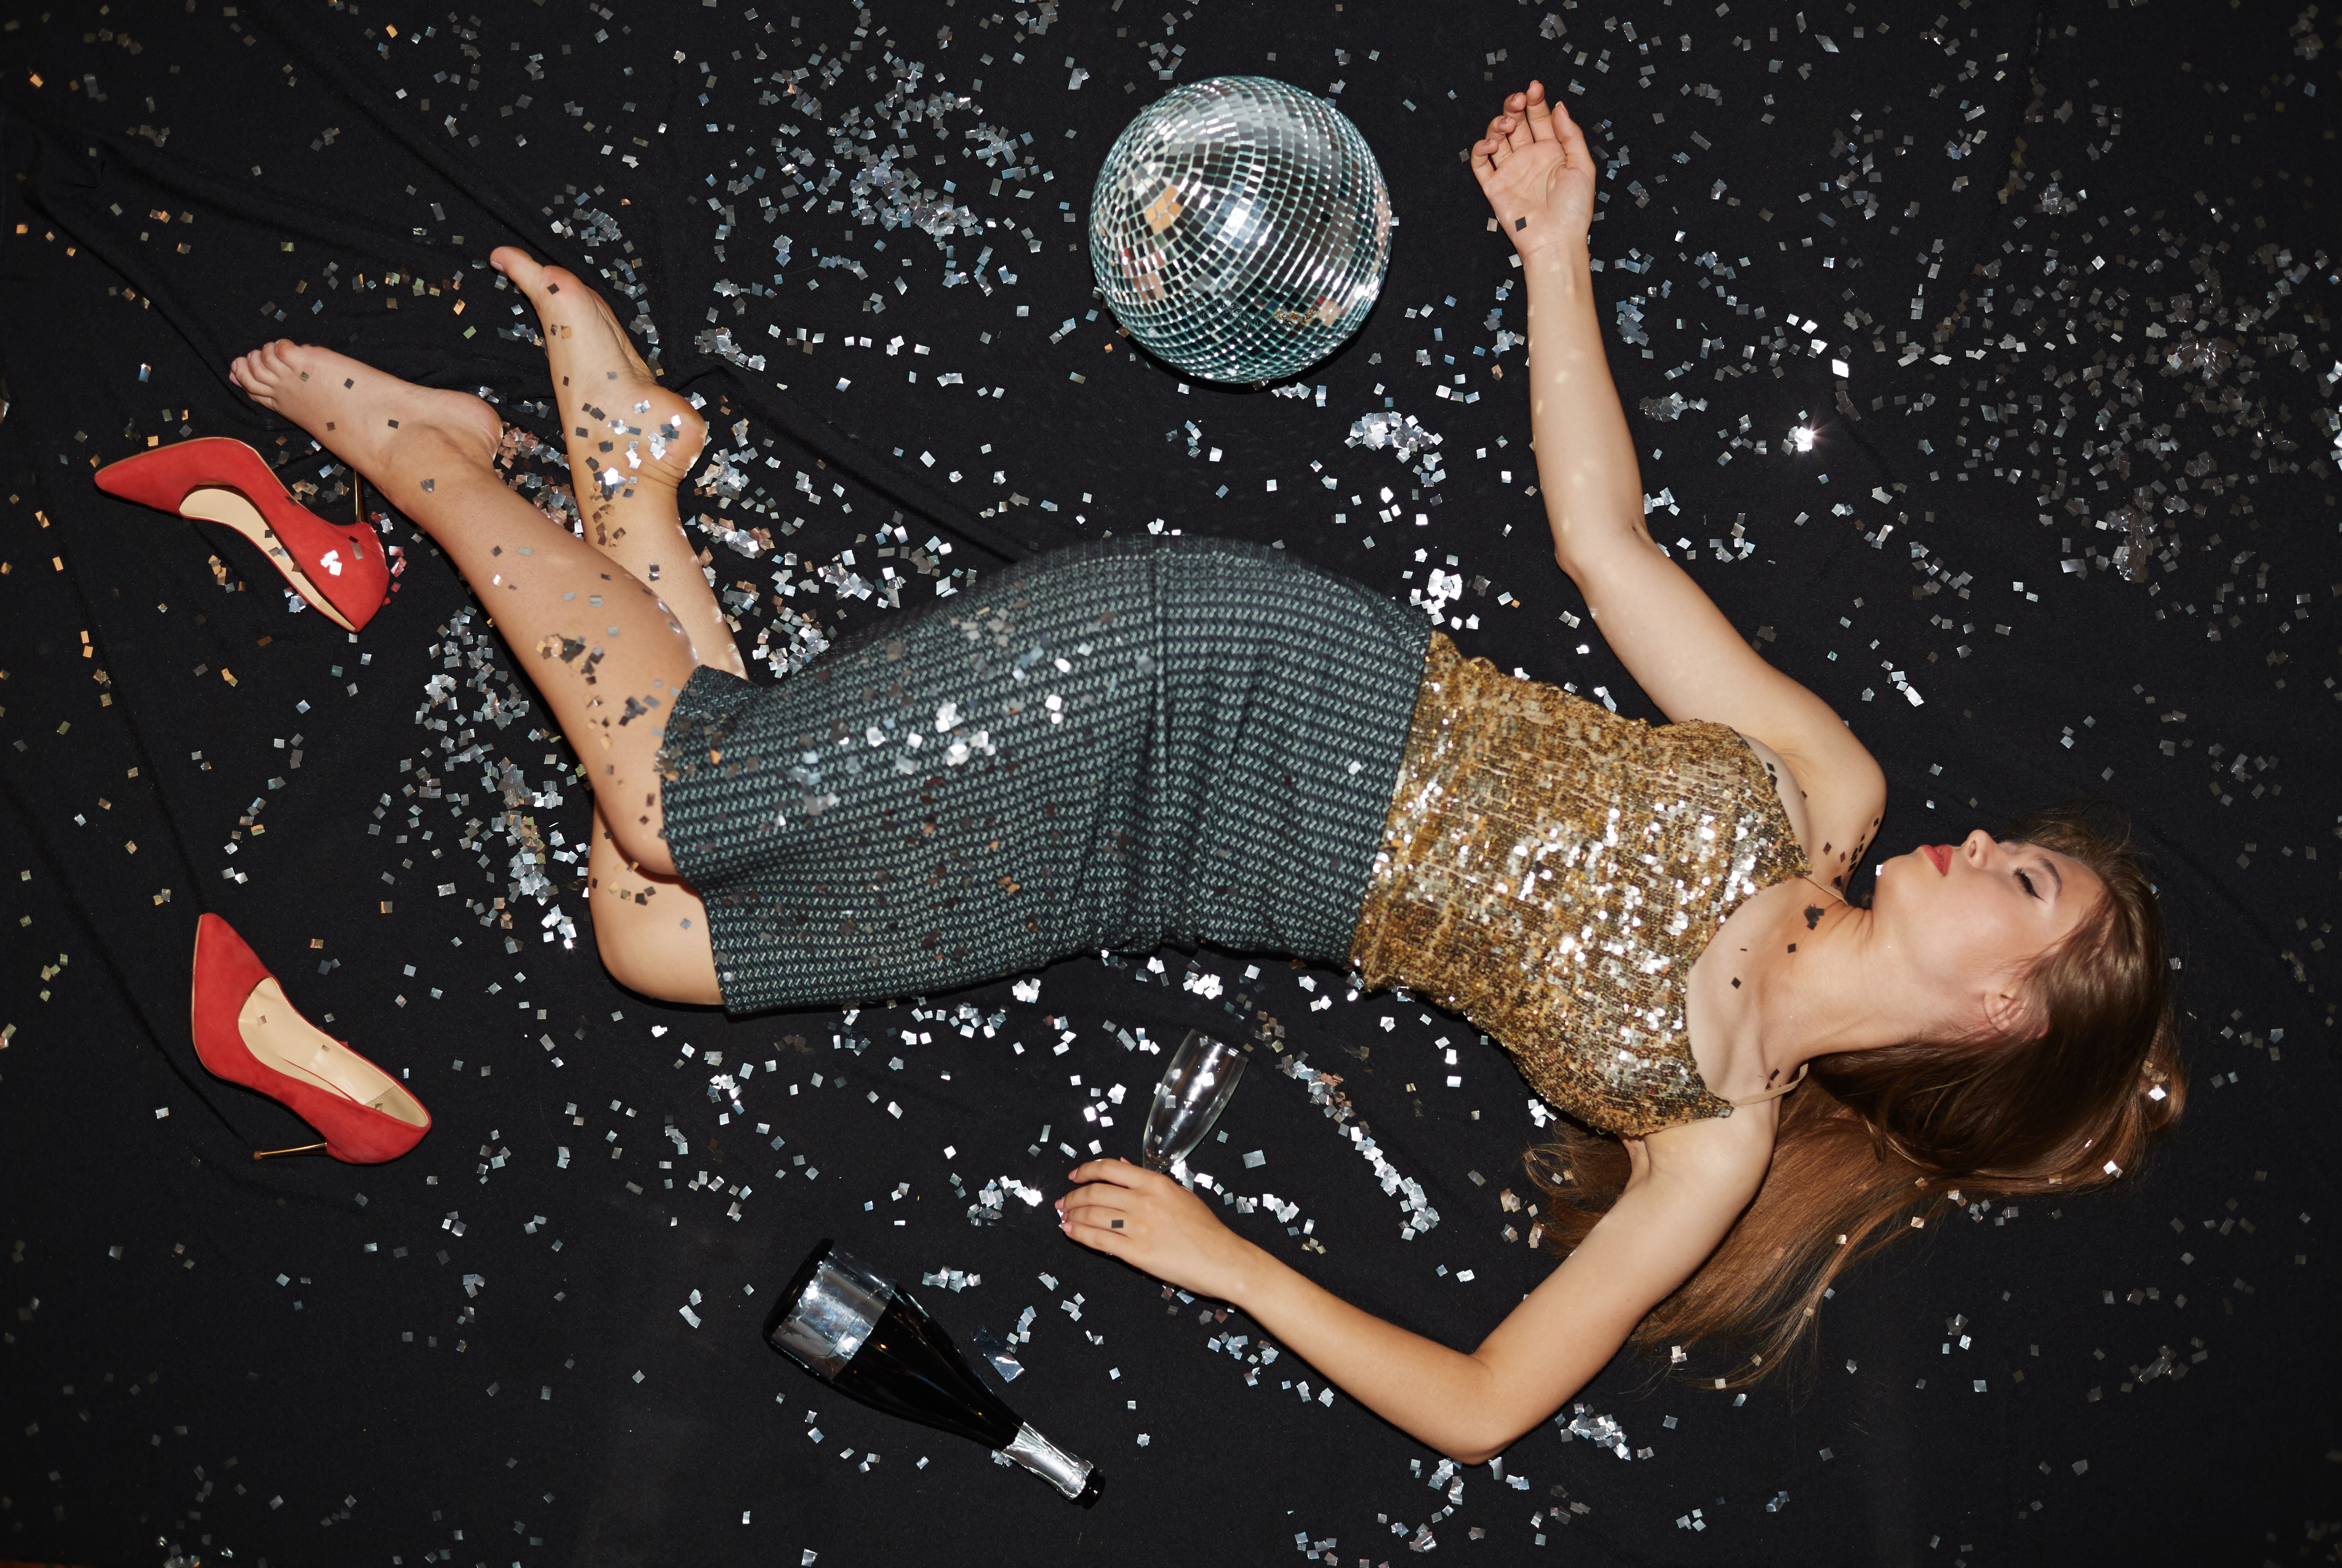 Girl lying on the floor after a party | Source: Shutterstock